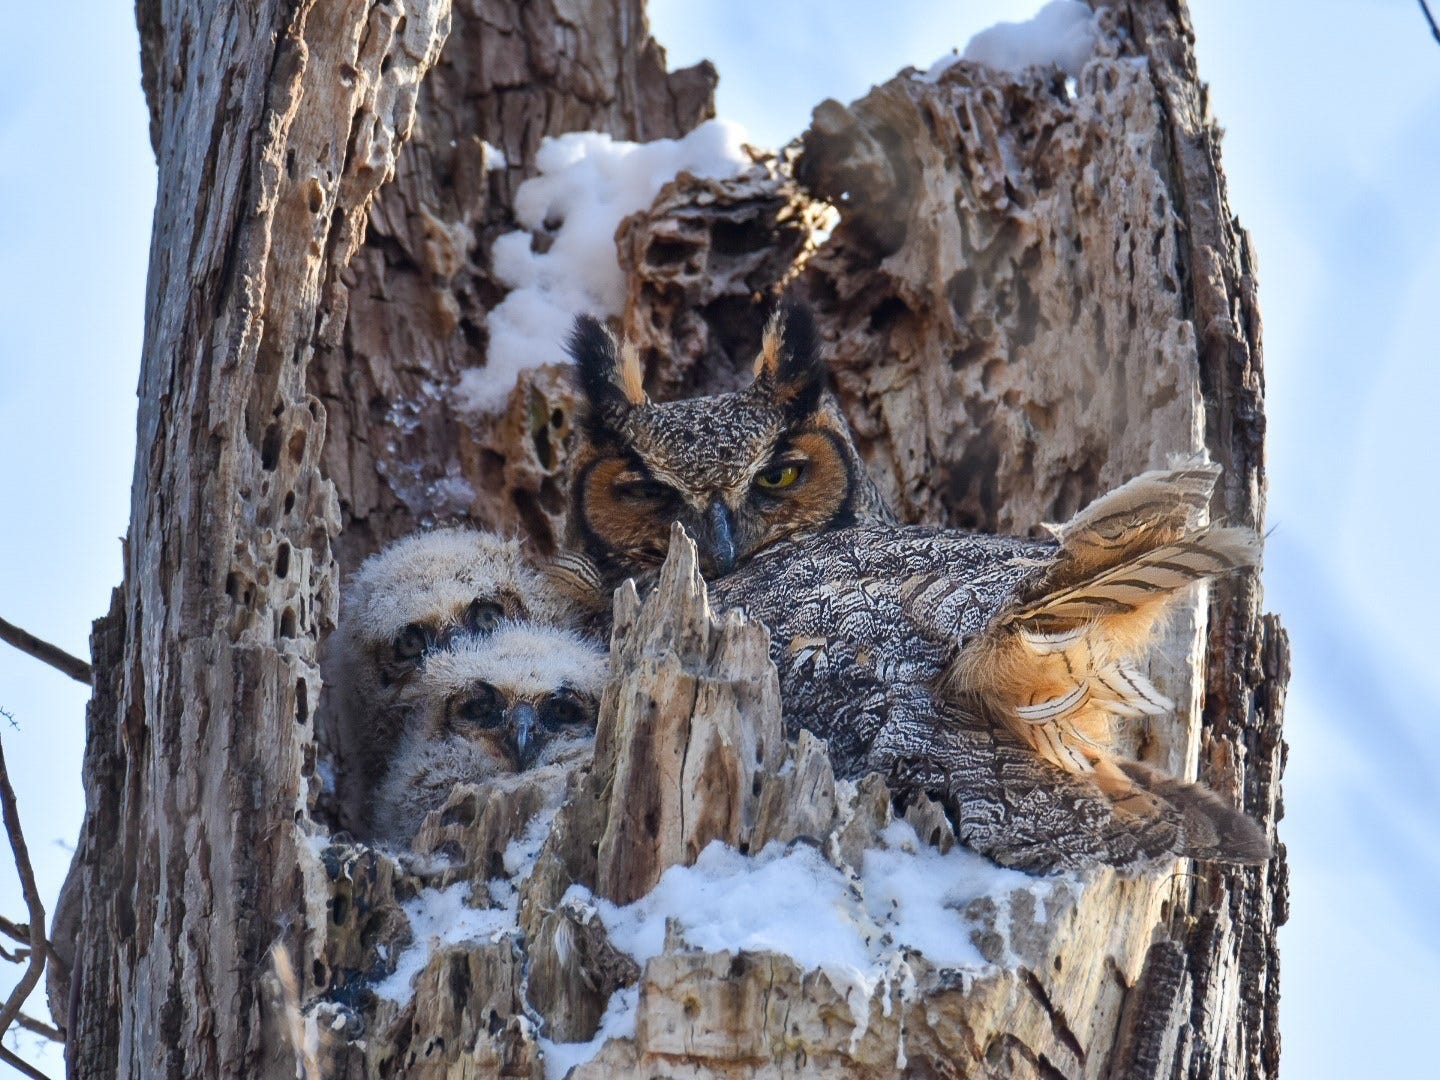 " Great Horned Owl and Chicks in Nest, " by John Fortener of Allen Park. He was looking for a Great Horned Owl at Island Park in Ann Arbor and found it camouflaged in an old tree stump. Then, " to my surprise, two owlets popped up, " he said. " This particular day is one I will not soon forget.